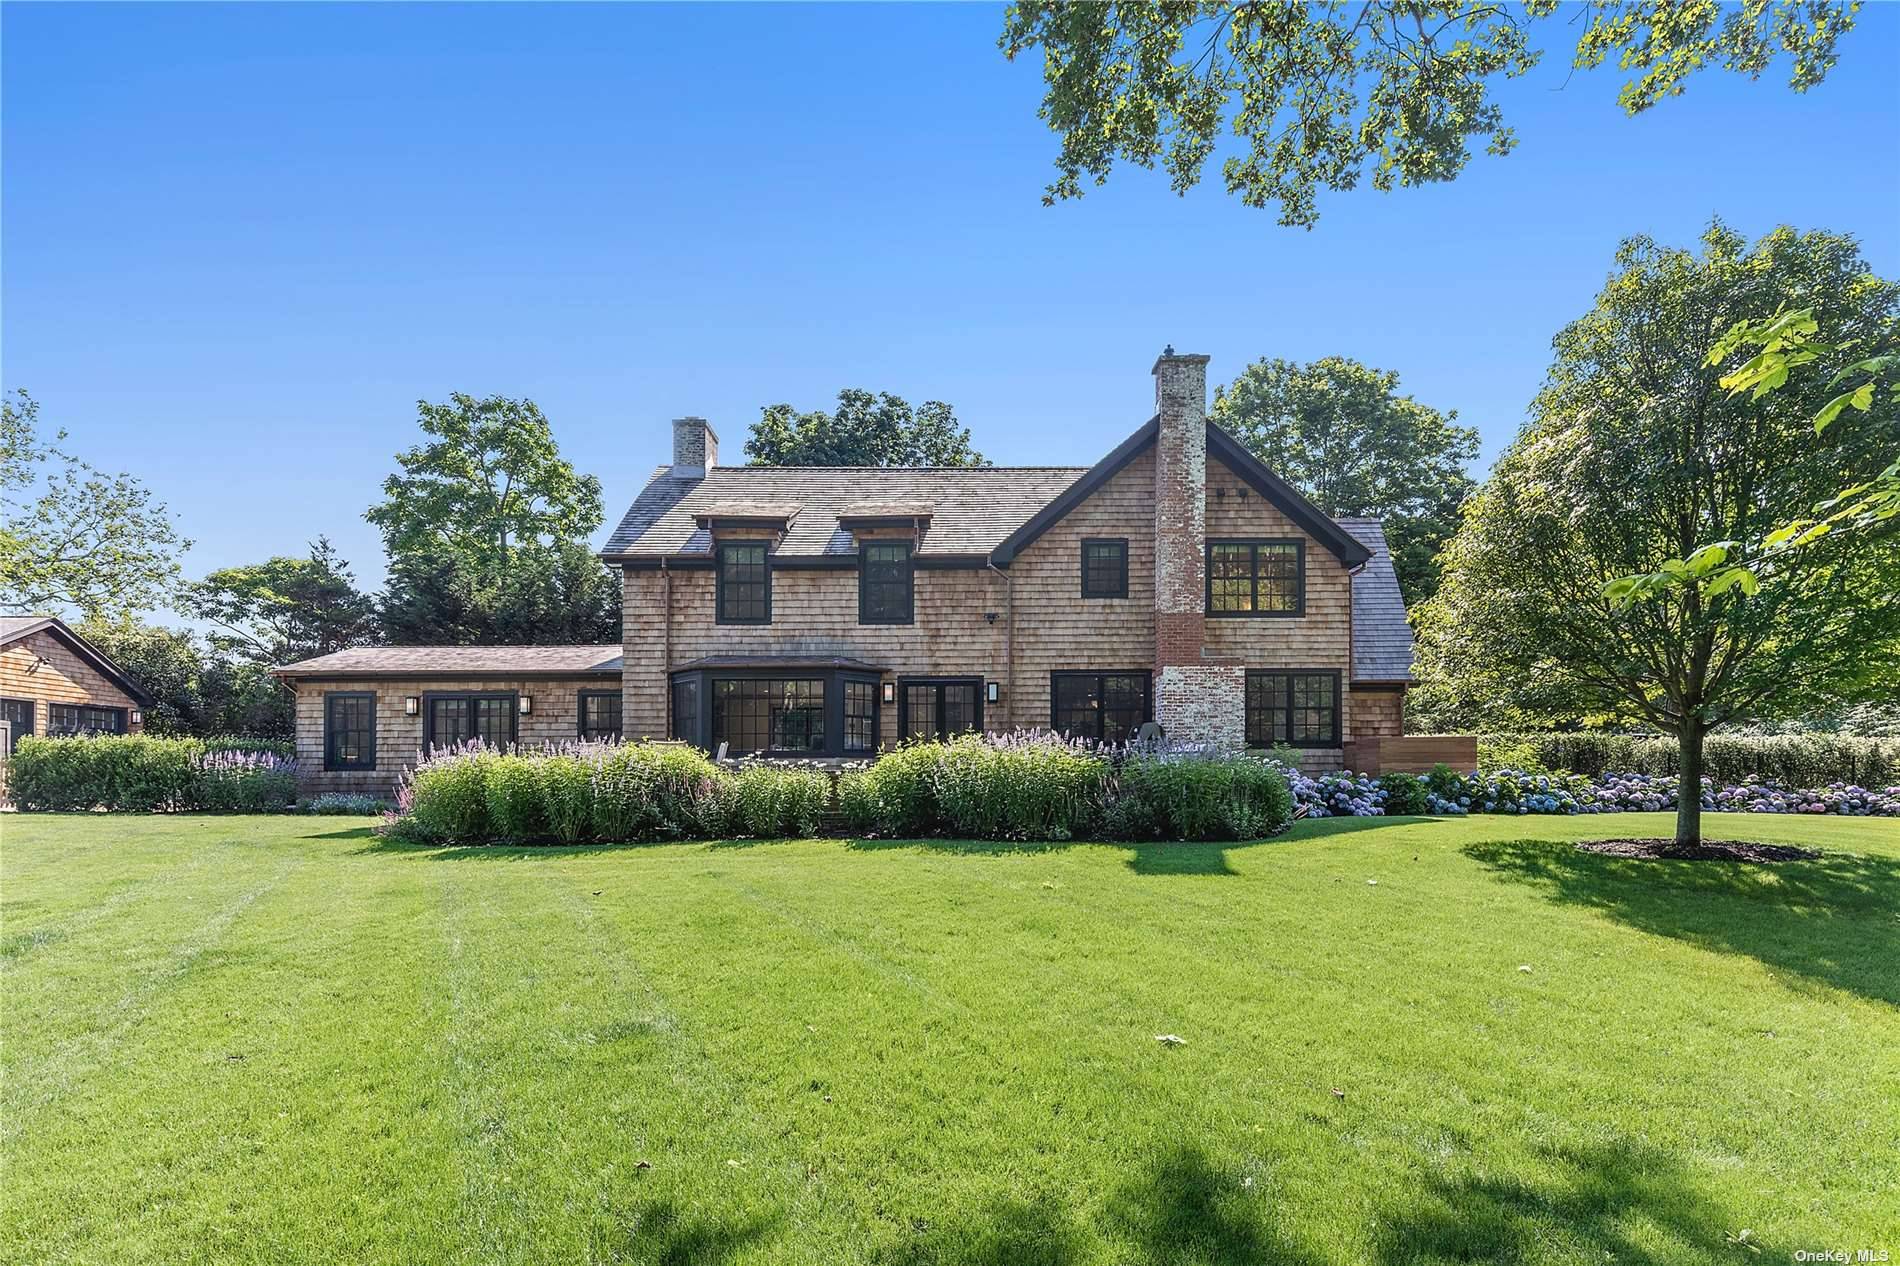 Just renovated in 2021 and situated on an acre plus south of the highway lot in Bridgehampton, this two story smart home with full pool house exudes a casual and ...